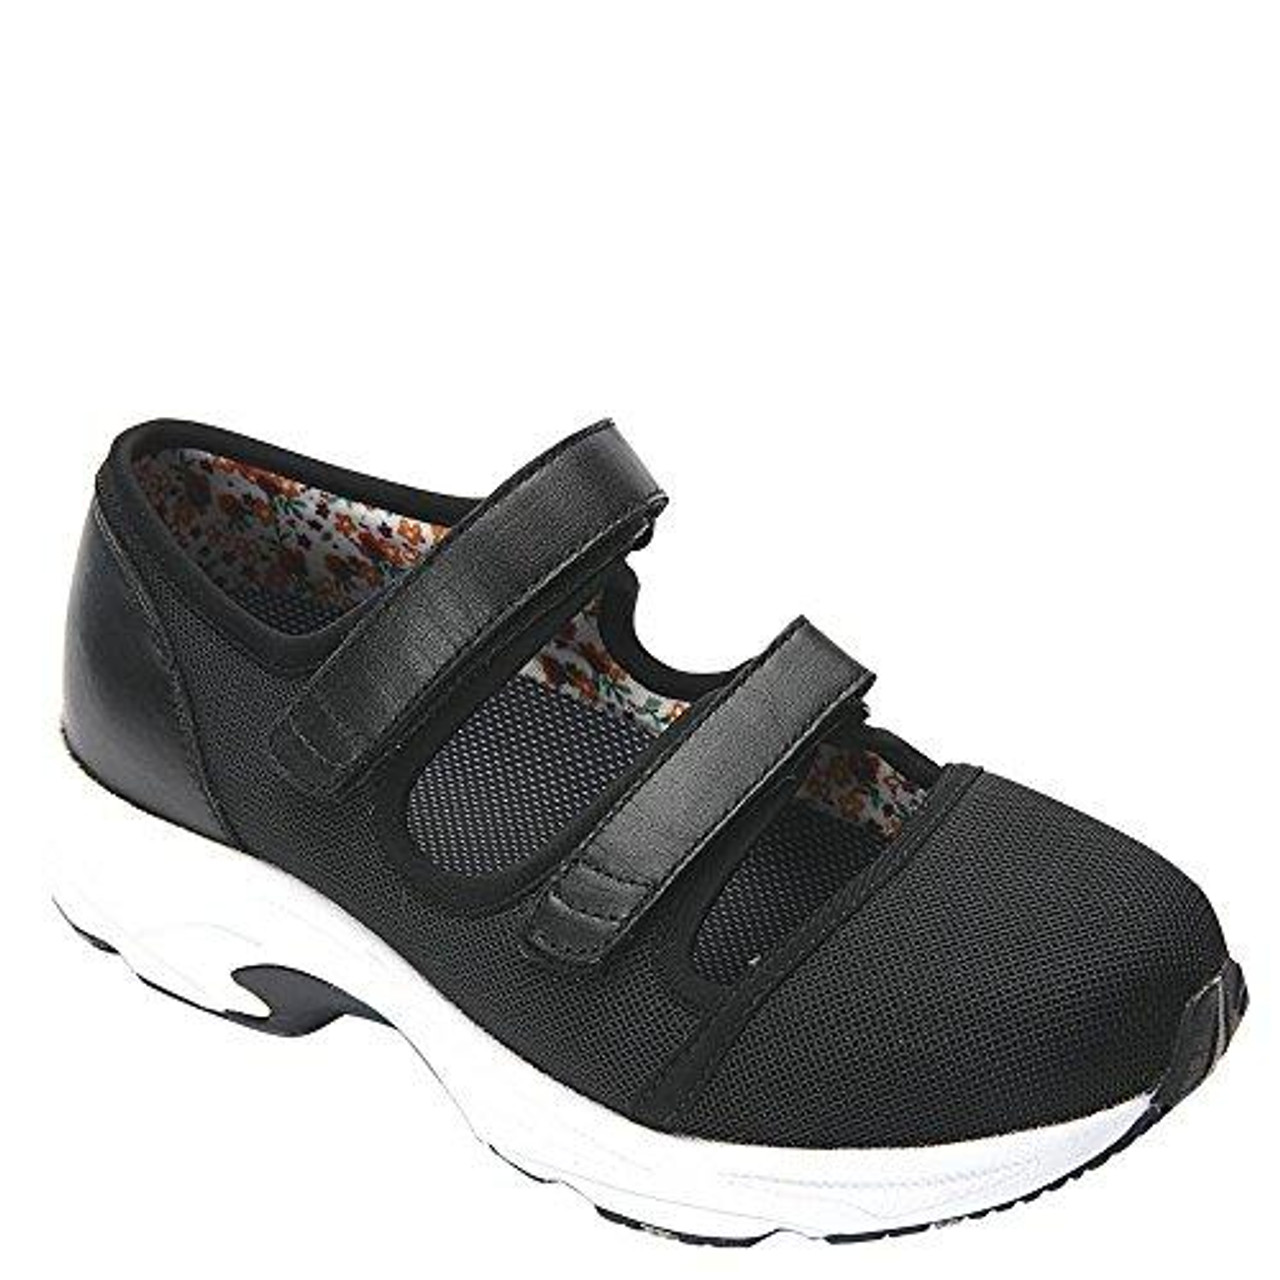 Drew Solo - Women's - Therapeutic Athletic shoe - Free Shipping